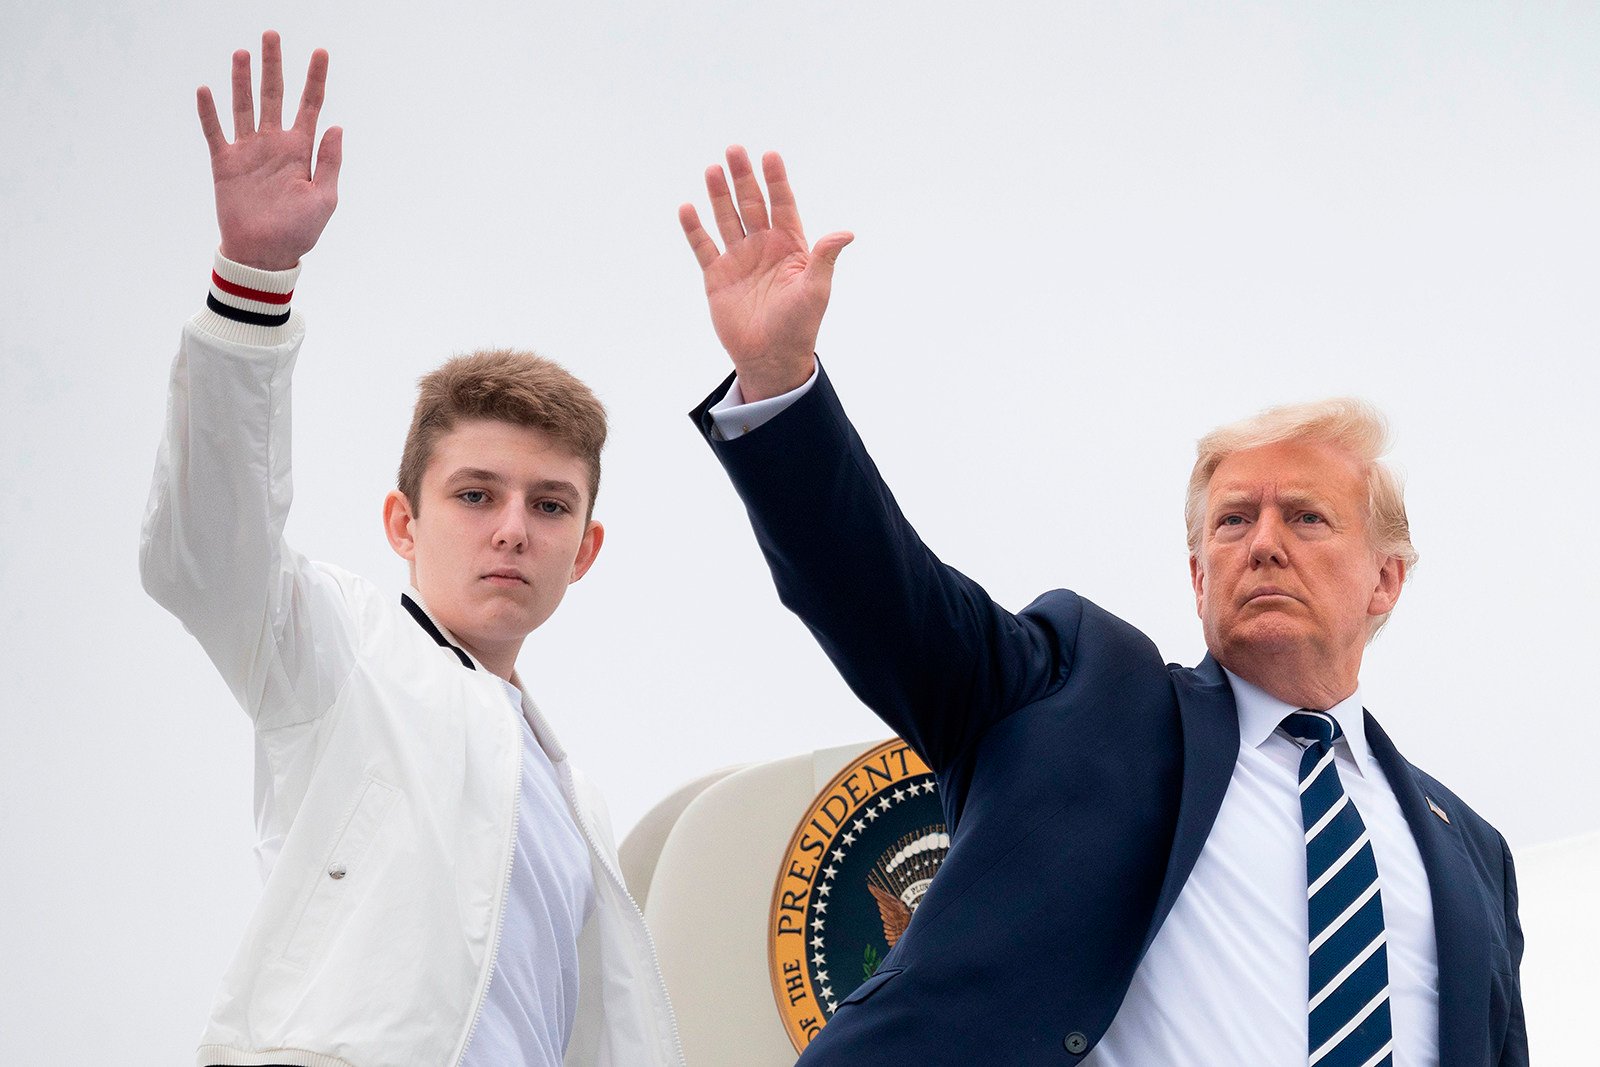 US President Donald Trump and his son Barron wave as they board Air Force One in Morristown, New Jersey, in August 2020. Photo: TNS